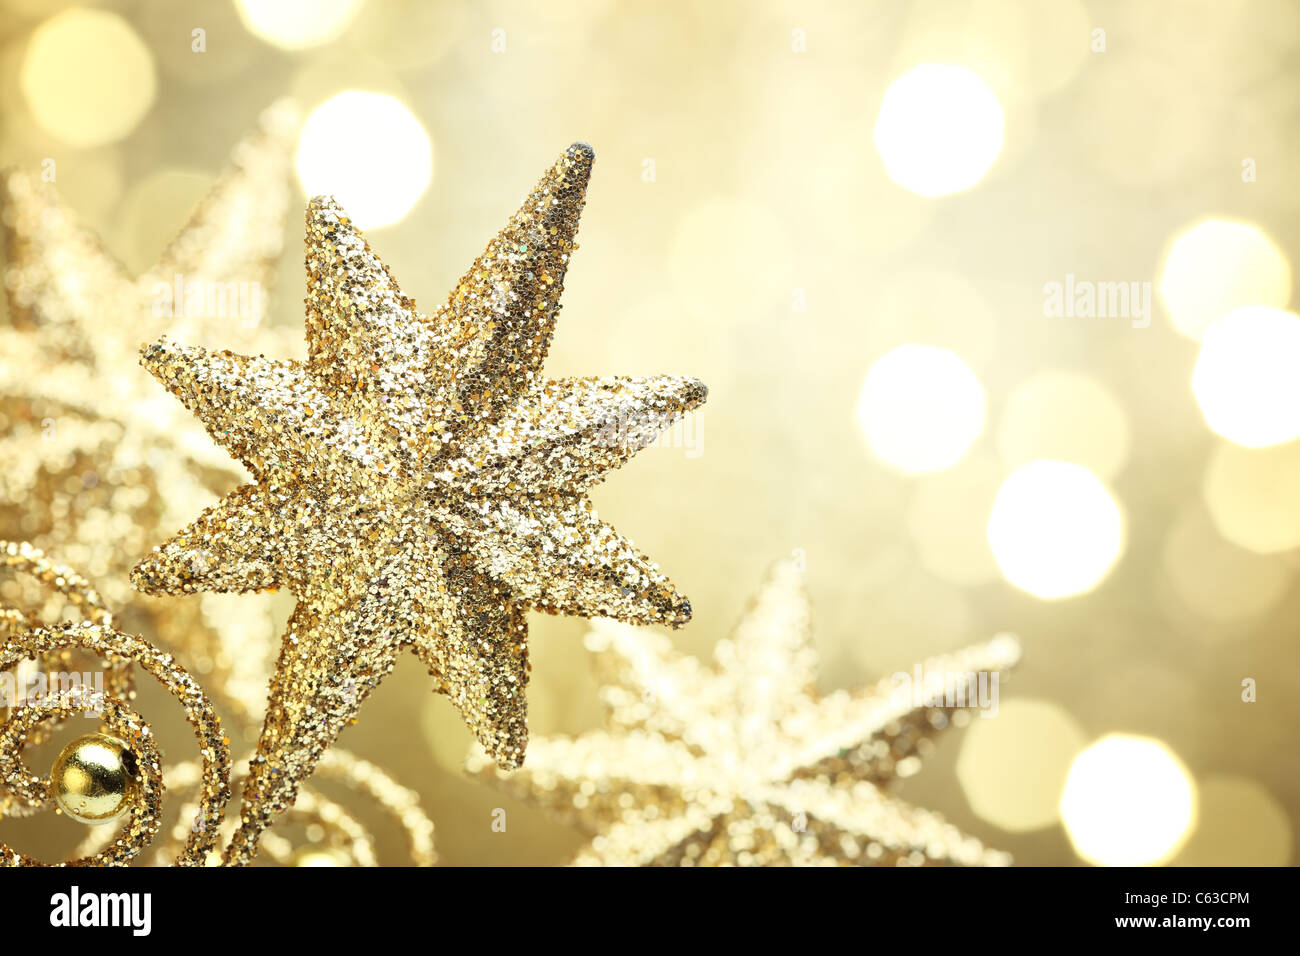 Closeup of golden star on abstract golden light background. Stock Photo